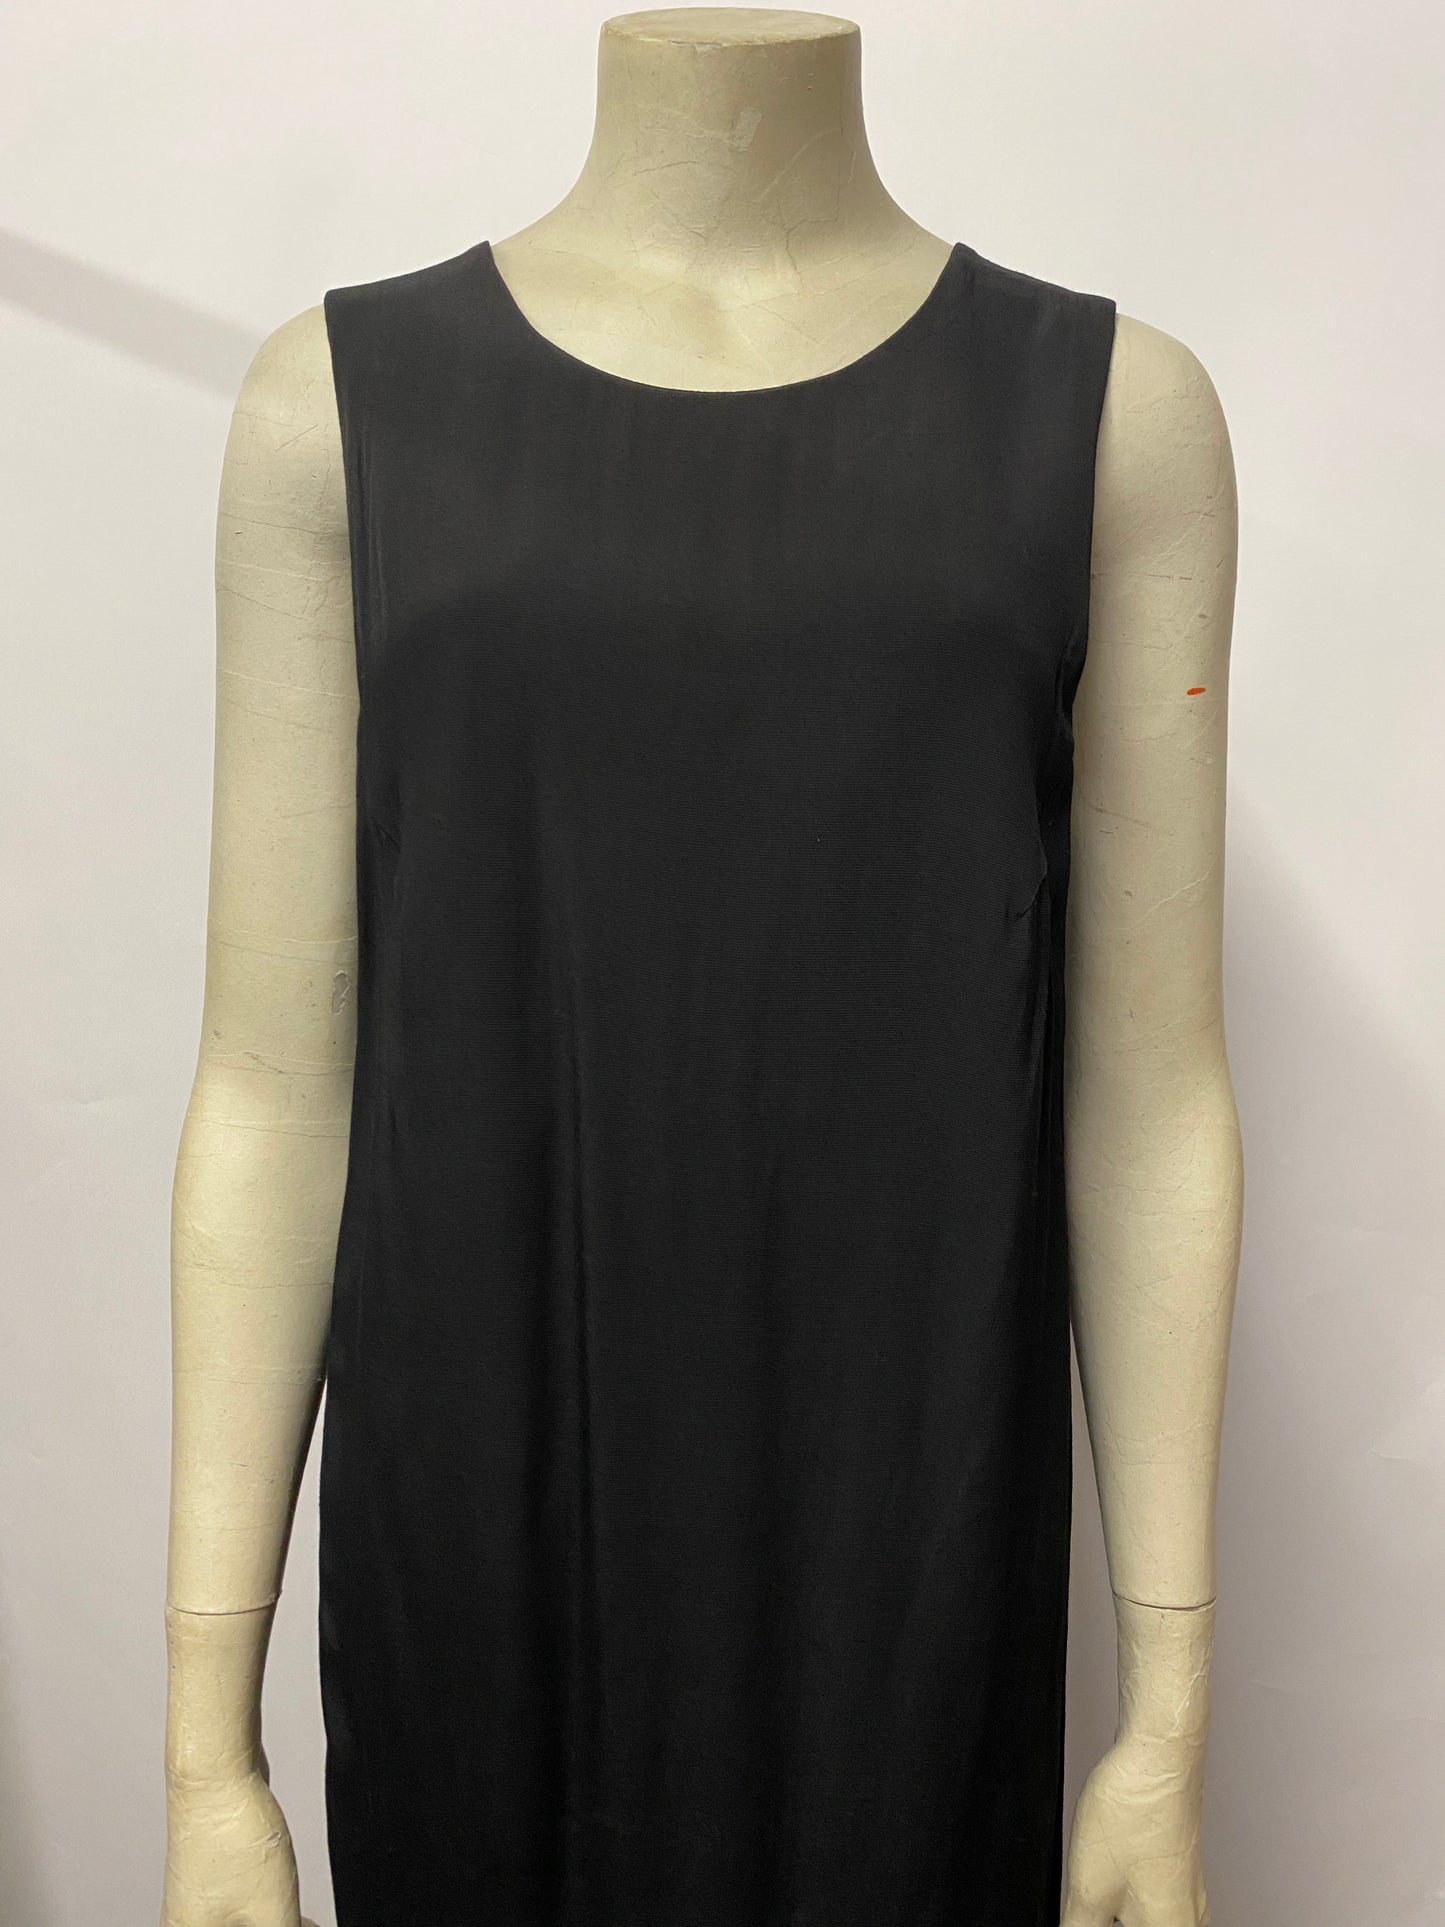 & Other Stories Black Viscose Simple Mid Length Dress 8